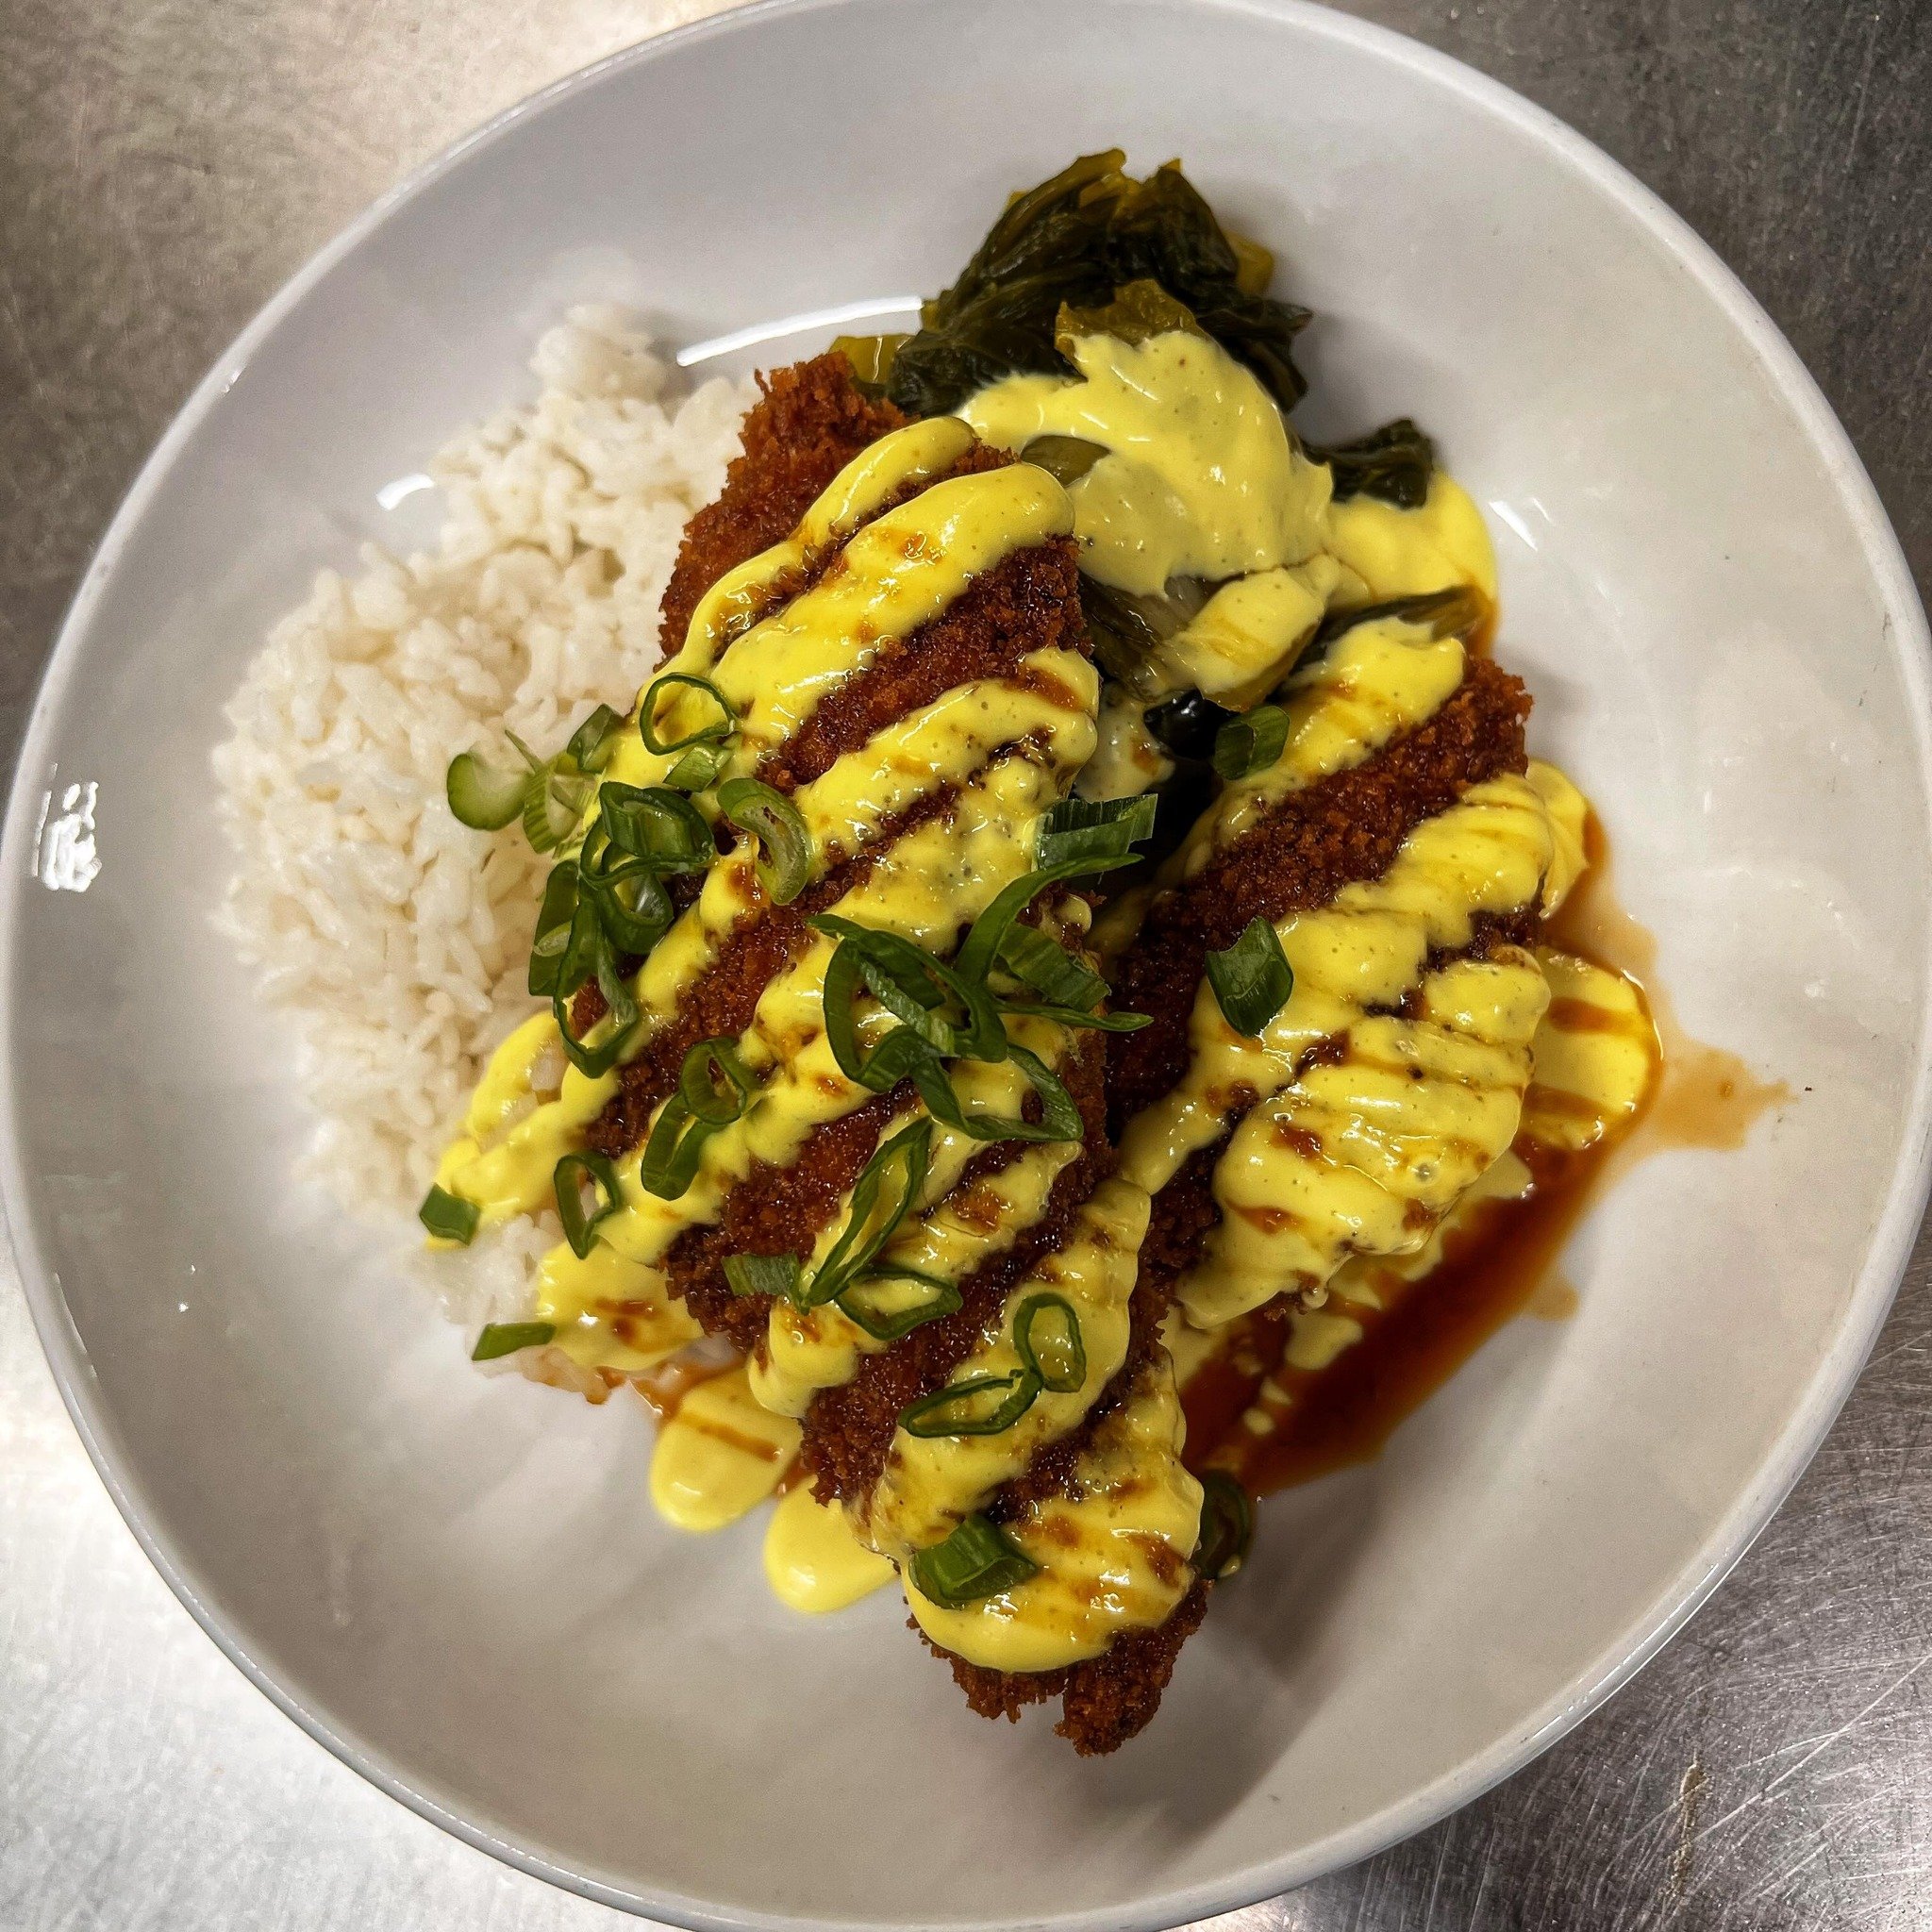 🎣Freshly caught Kahala Katsu 🎣

Special thanks to our fisherman Kevin Yamase. 
Comes with rice, house made kimchi, sweet soy glaze and garlic aioli. Stop by while we still have it!